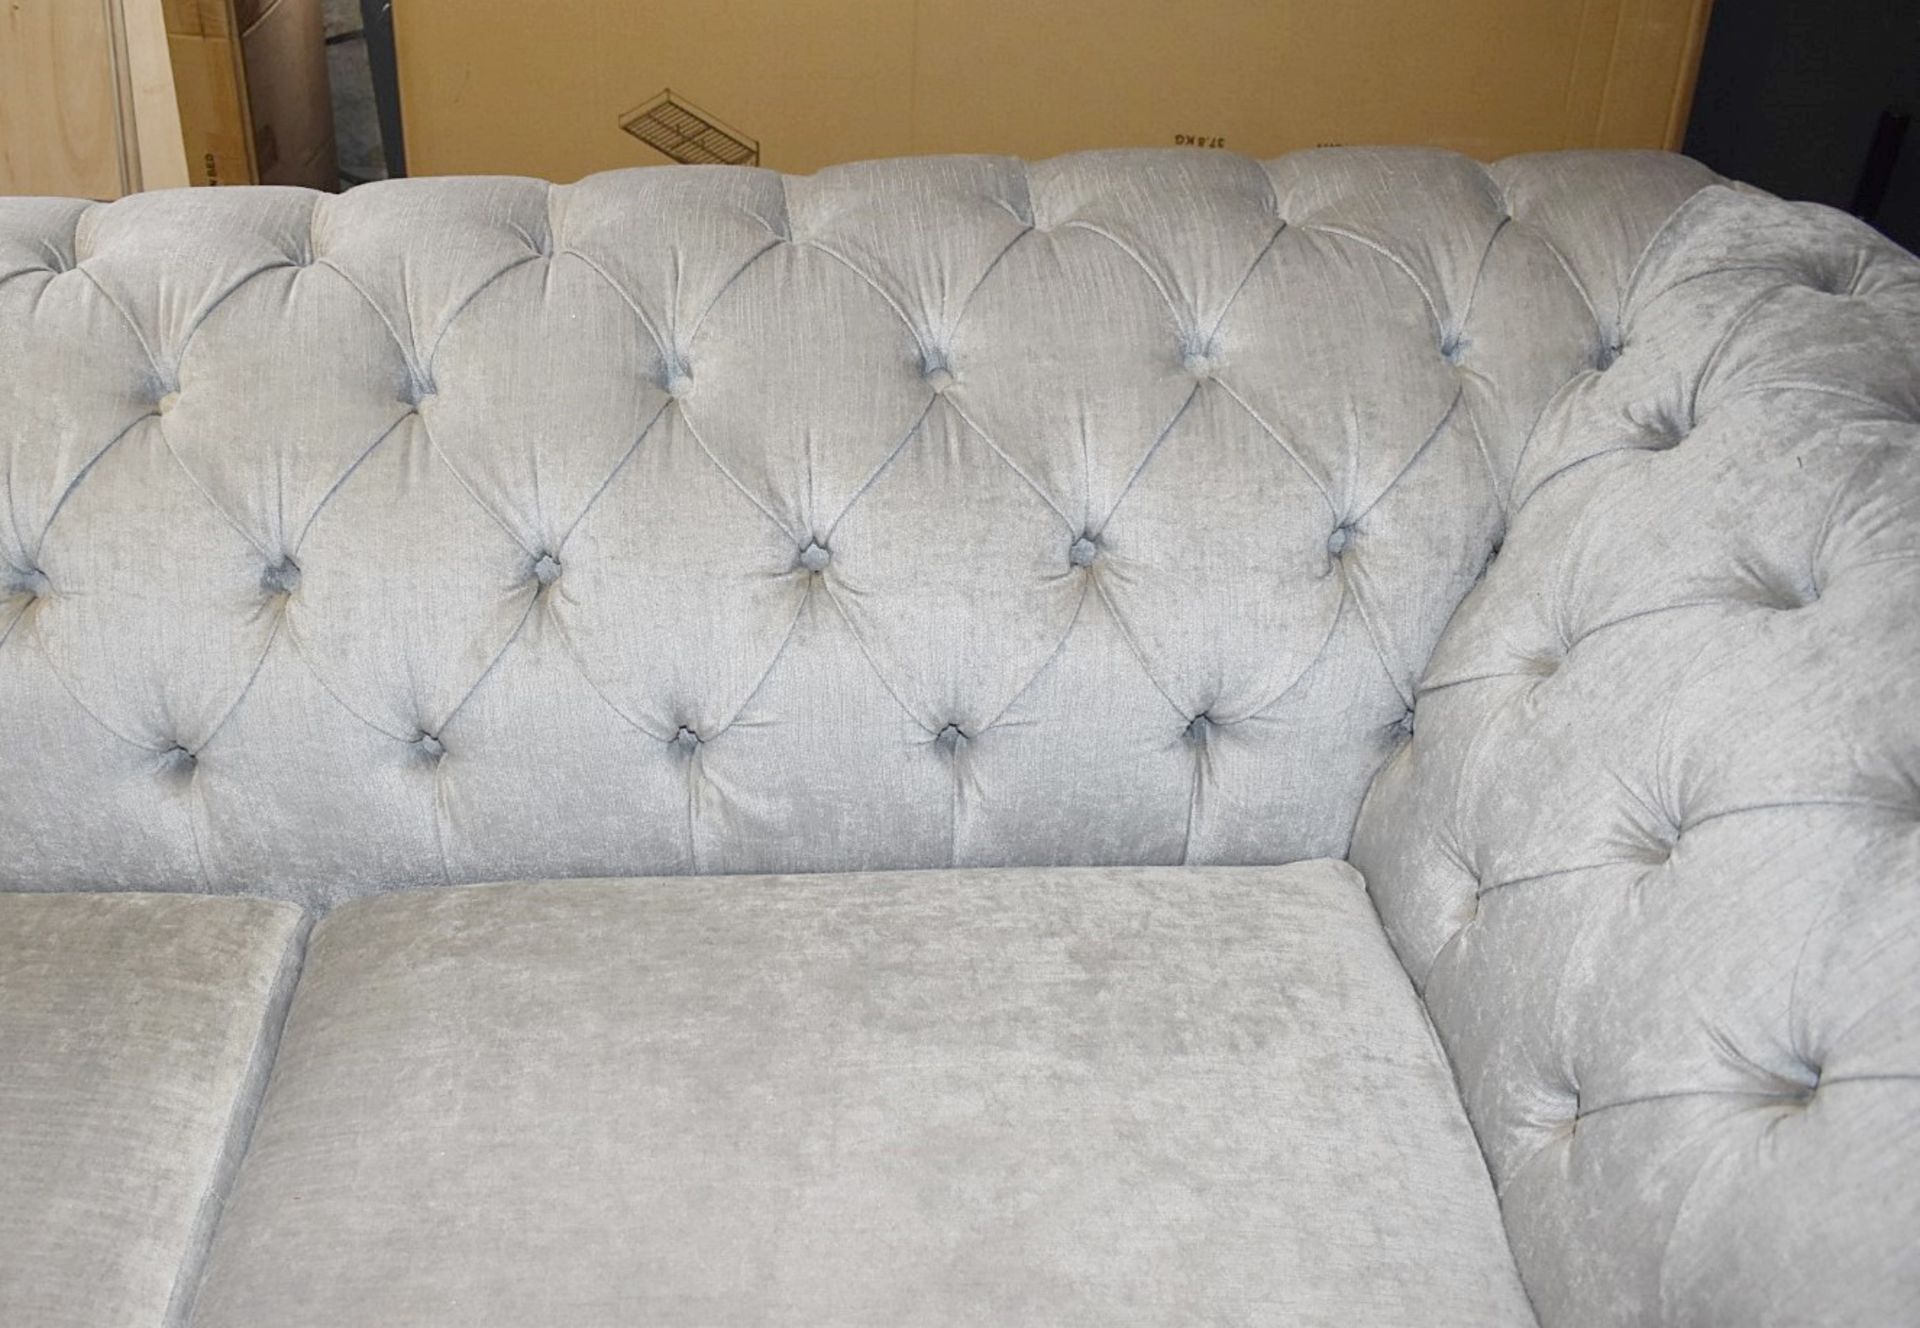 1 x Chesterfield-style Velvet Upholstered Sofa, on Castors, 2.2-Metres Wide  - Luxury Furniture - Image 7 of 14